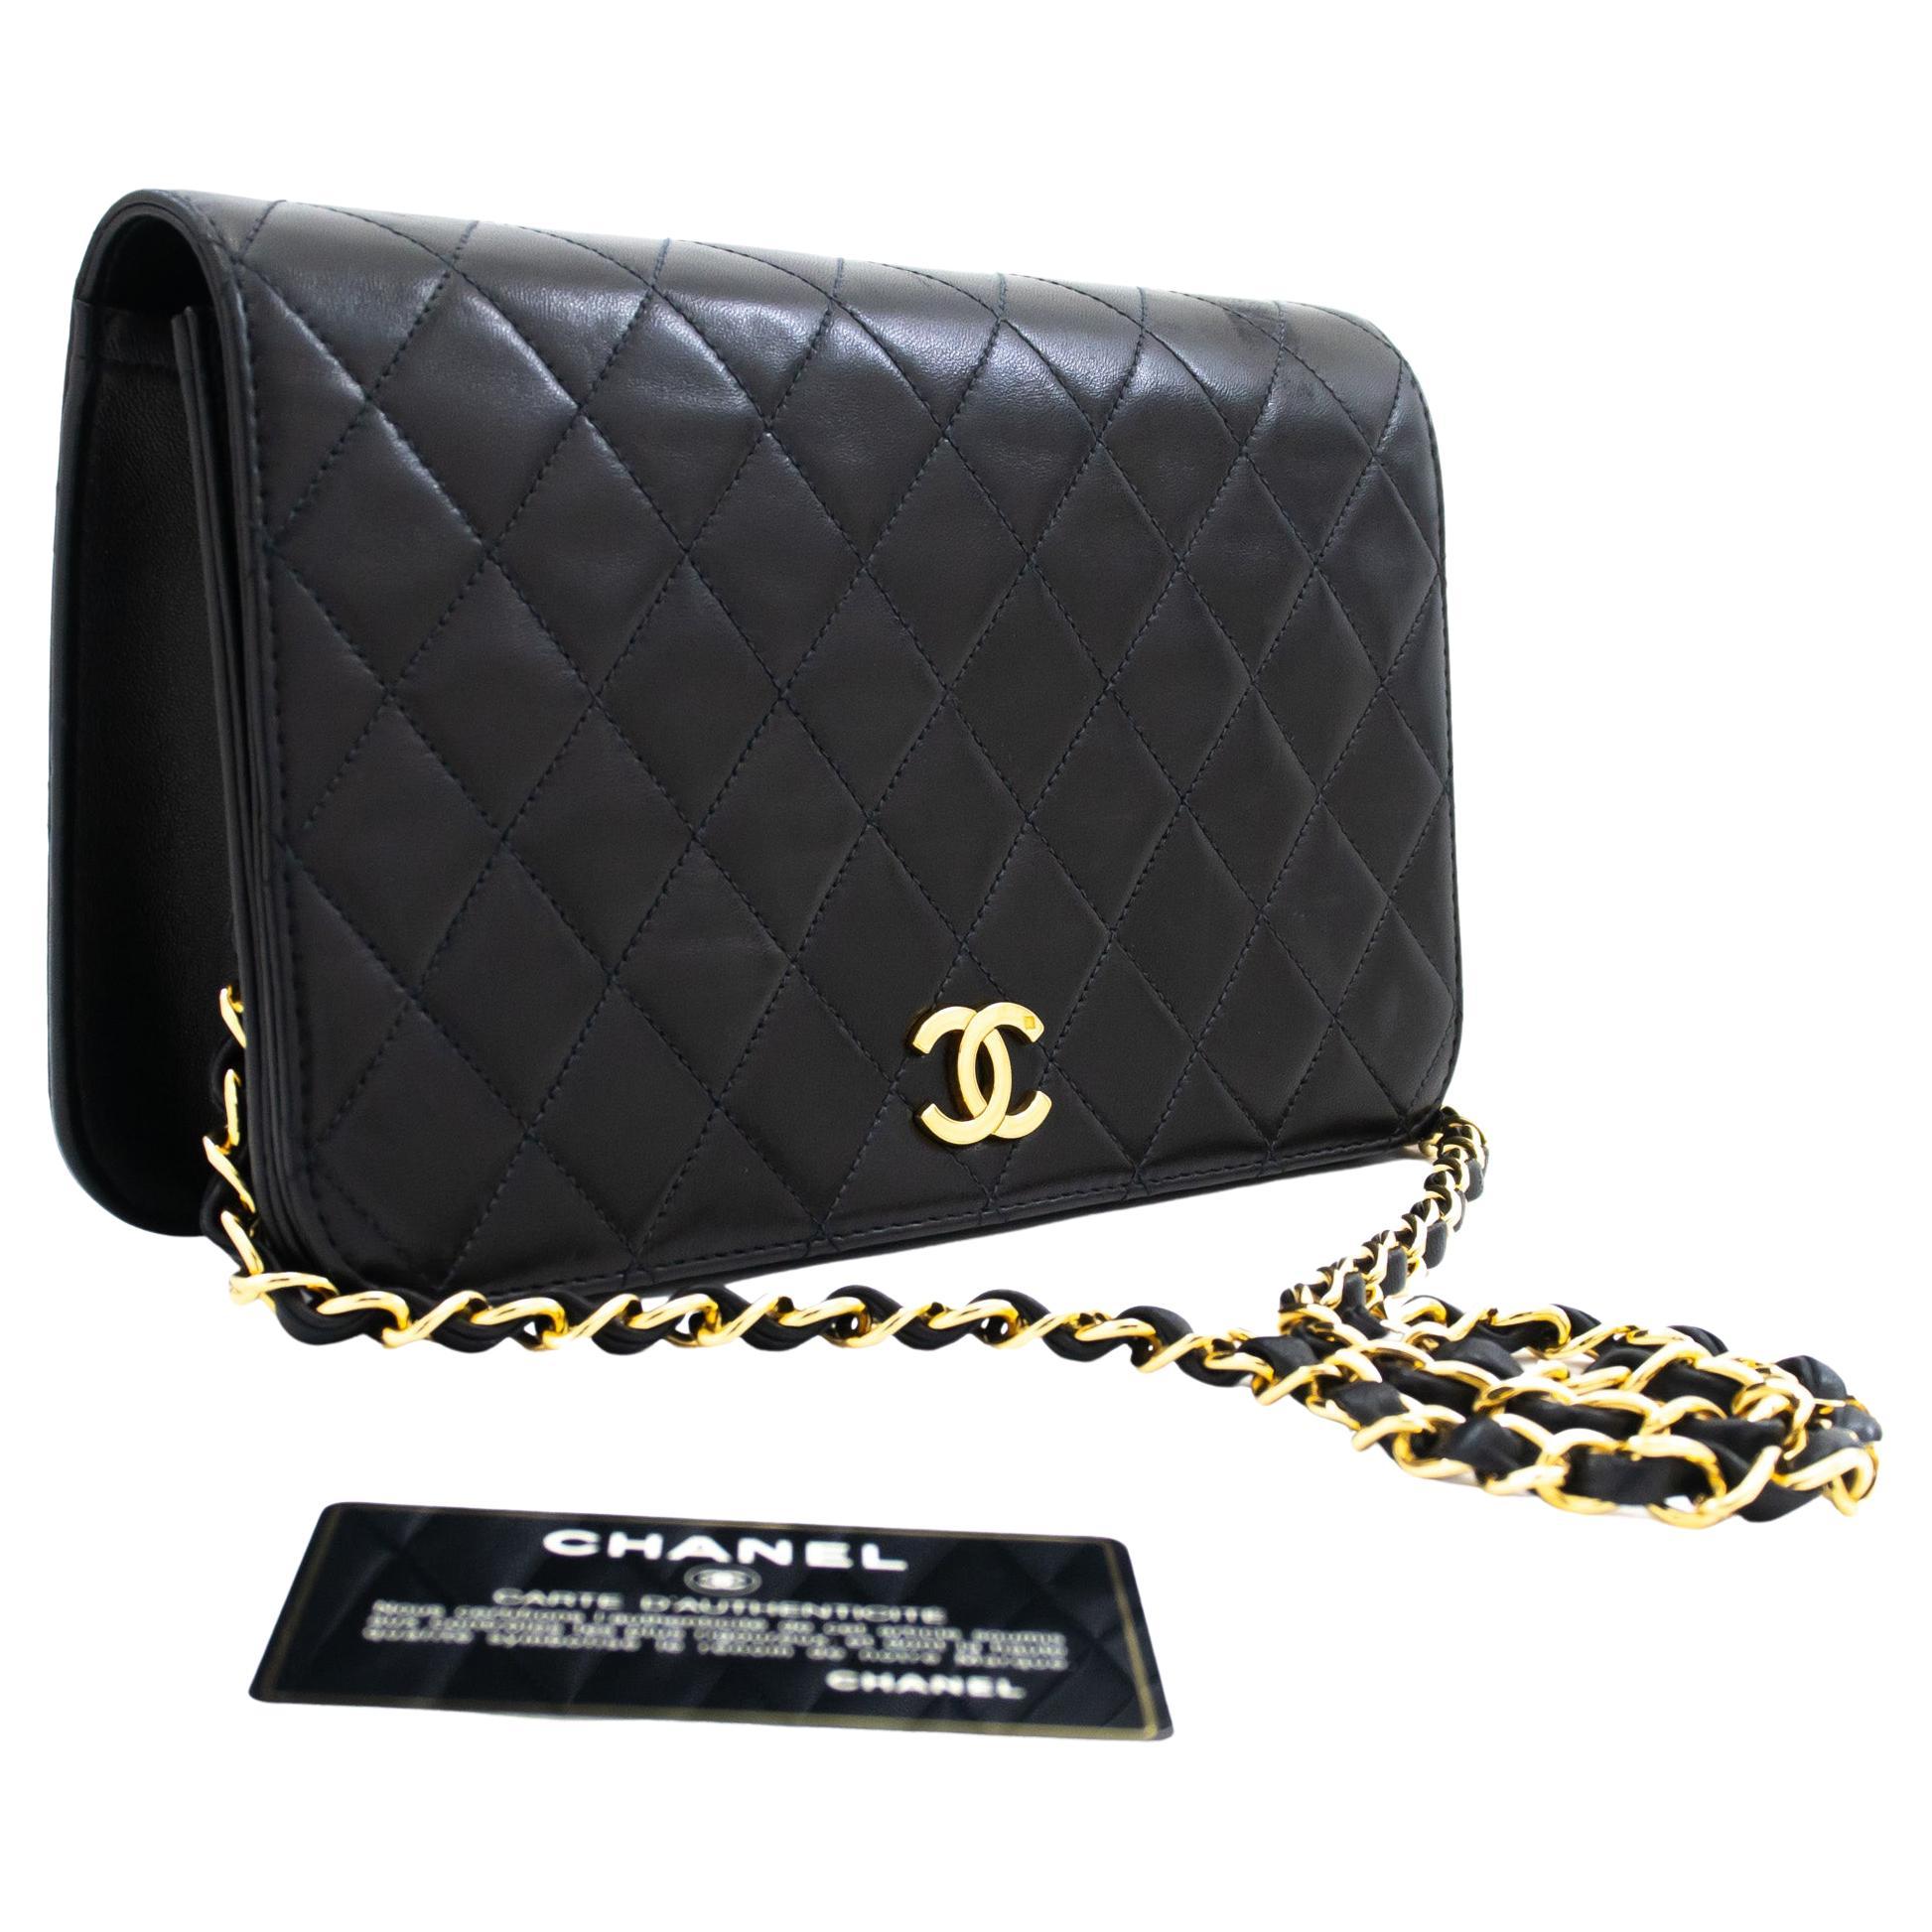 Black Chanel Clutch With Chain - 99 For Sale on 1stDibs  chanel clutch  with chain black, chanel black clutch with chain, chanel clutches with chain